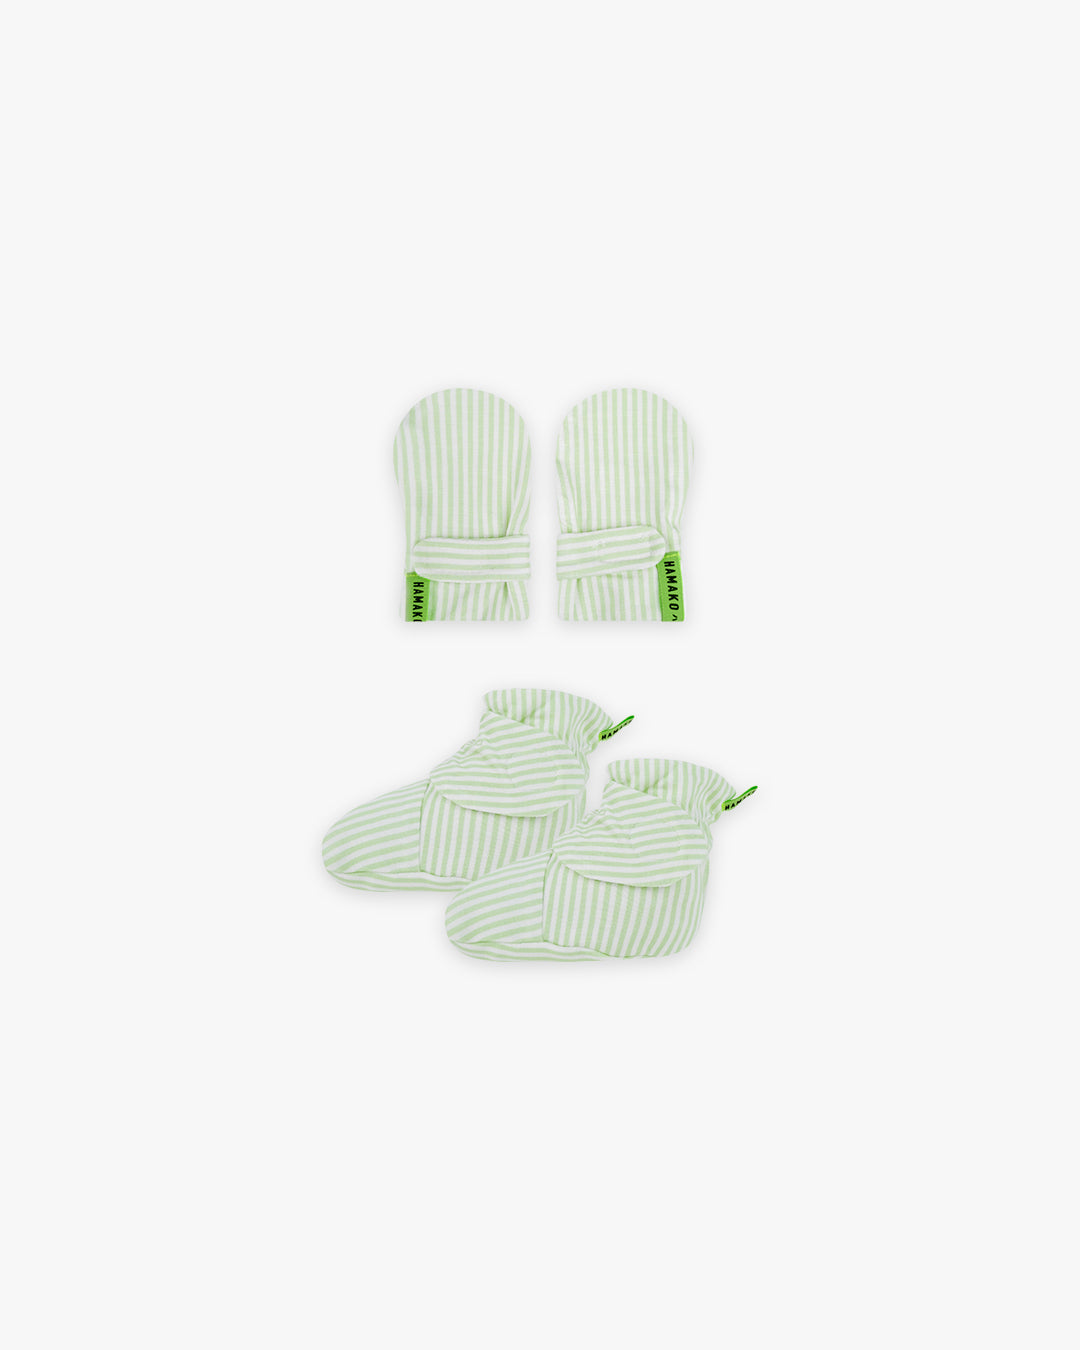 Mitten Booties | Striped Lime